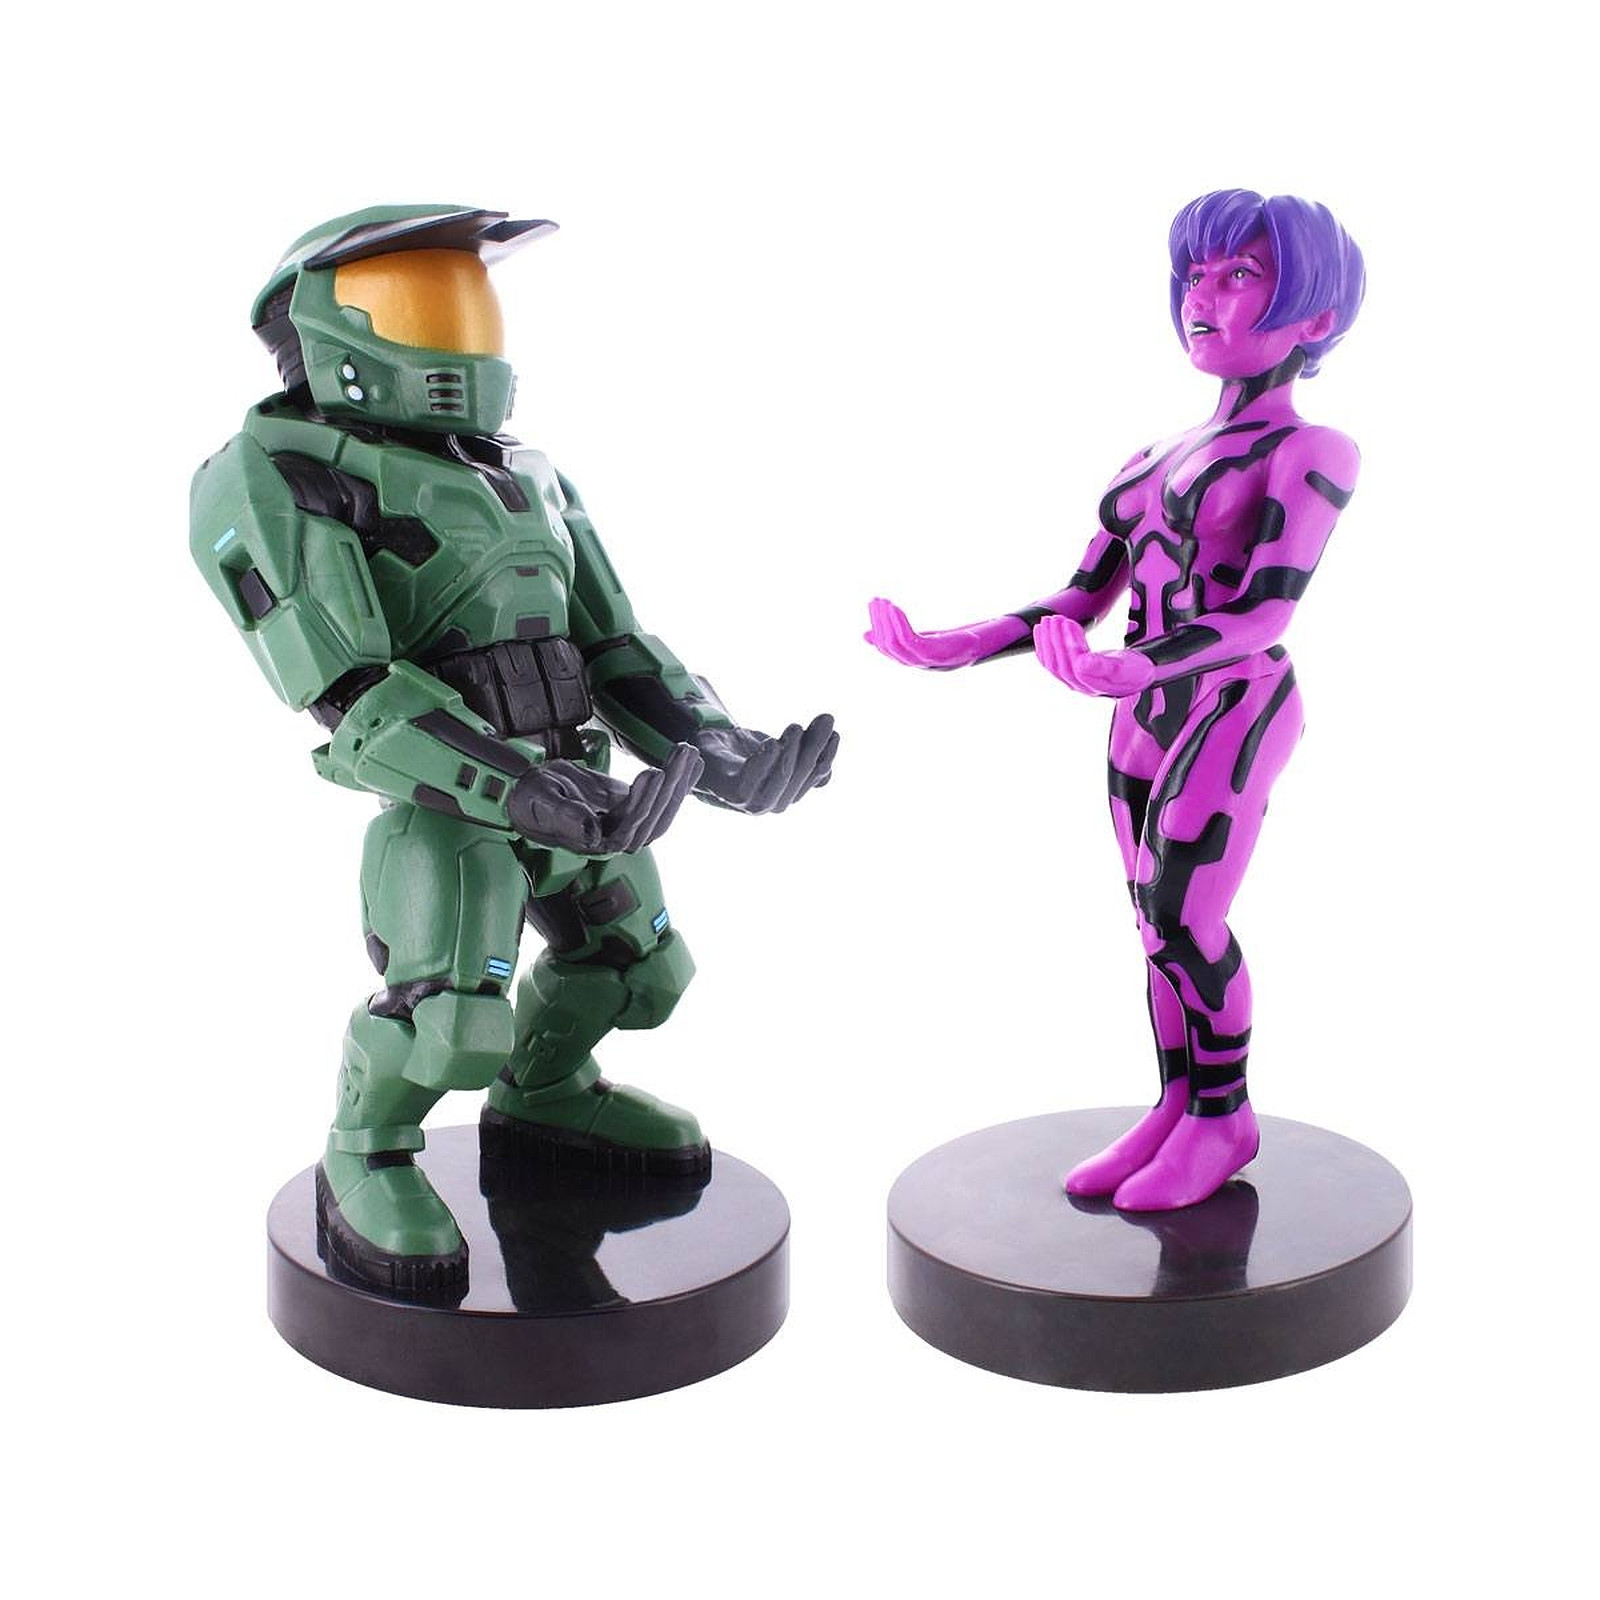 Halo 20th Anniversary - Pack de 2 Figurine Cable Guy Master Chief & Cortana 20 cm - Figurines Exquisite Gaming